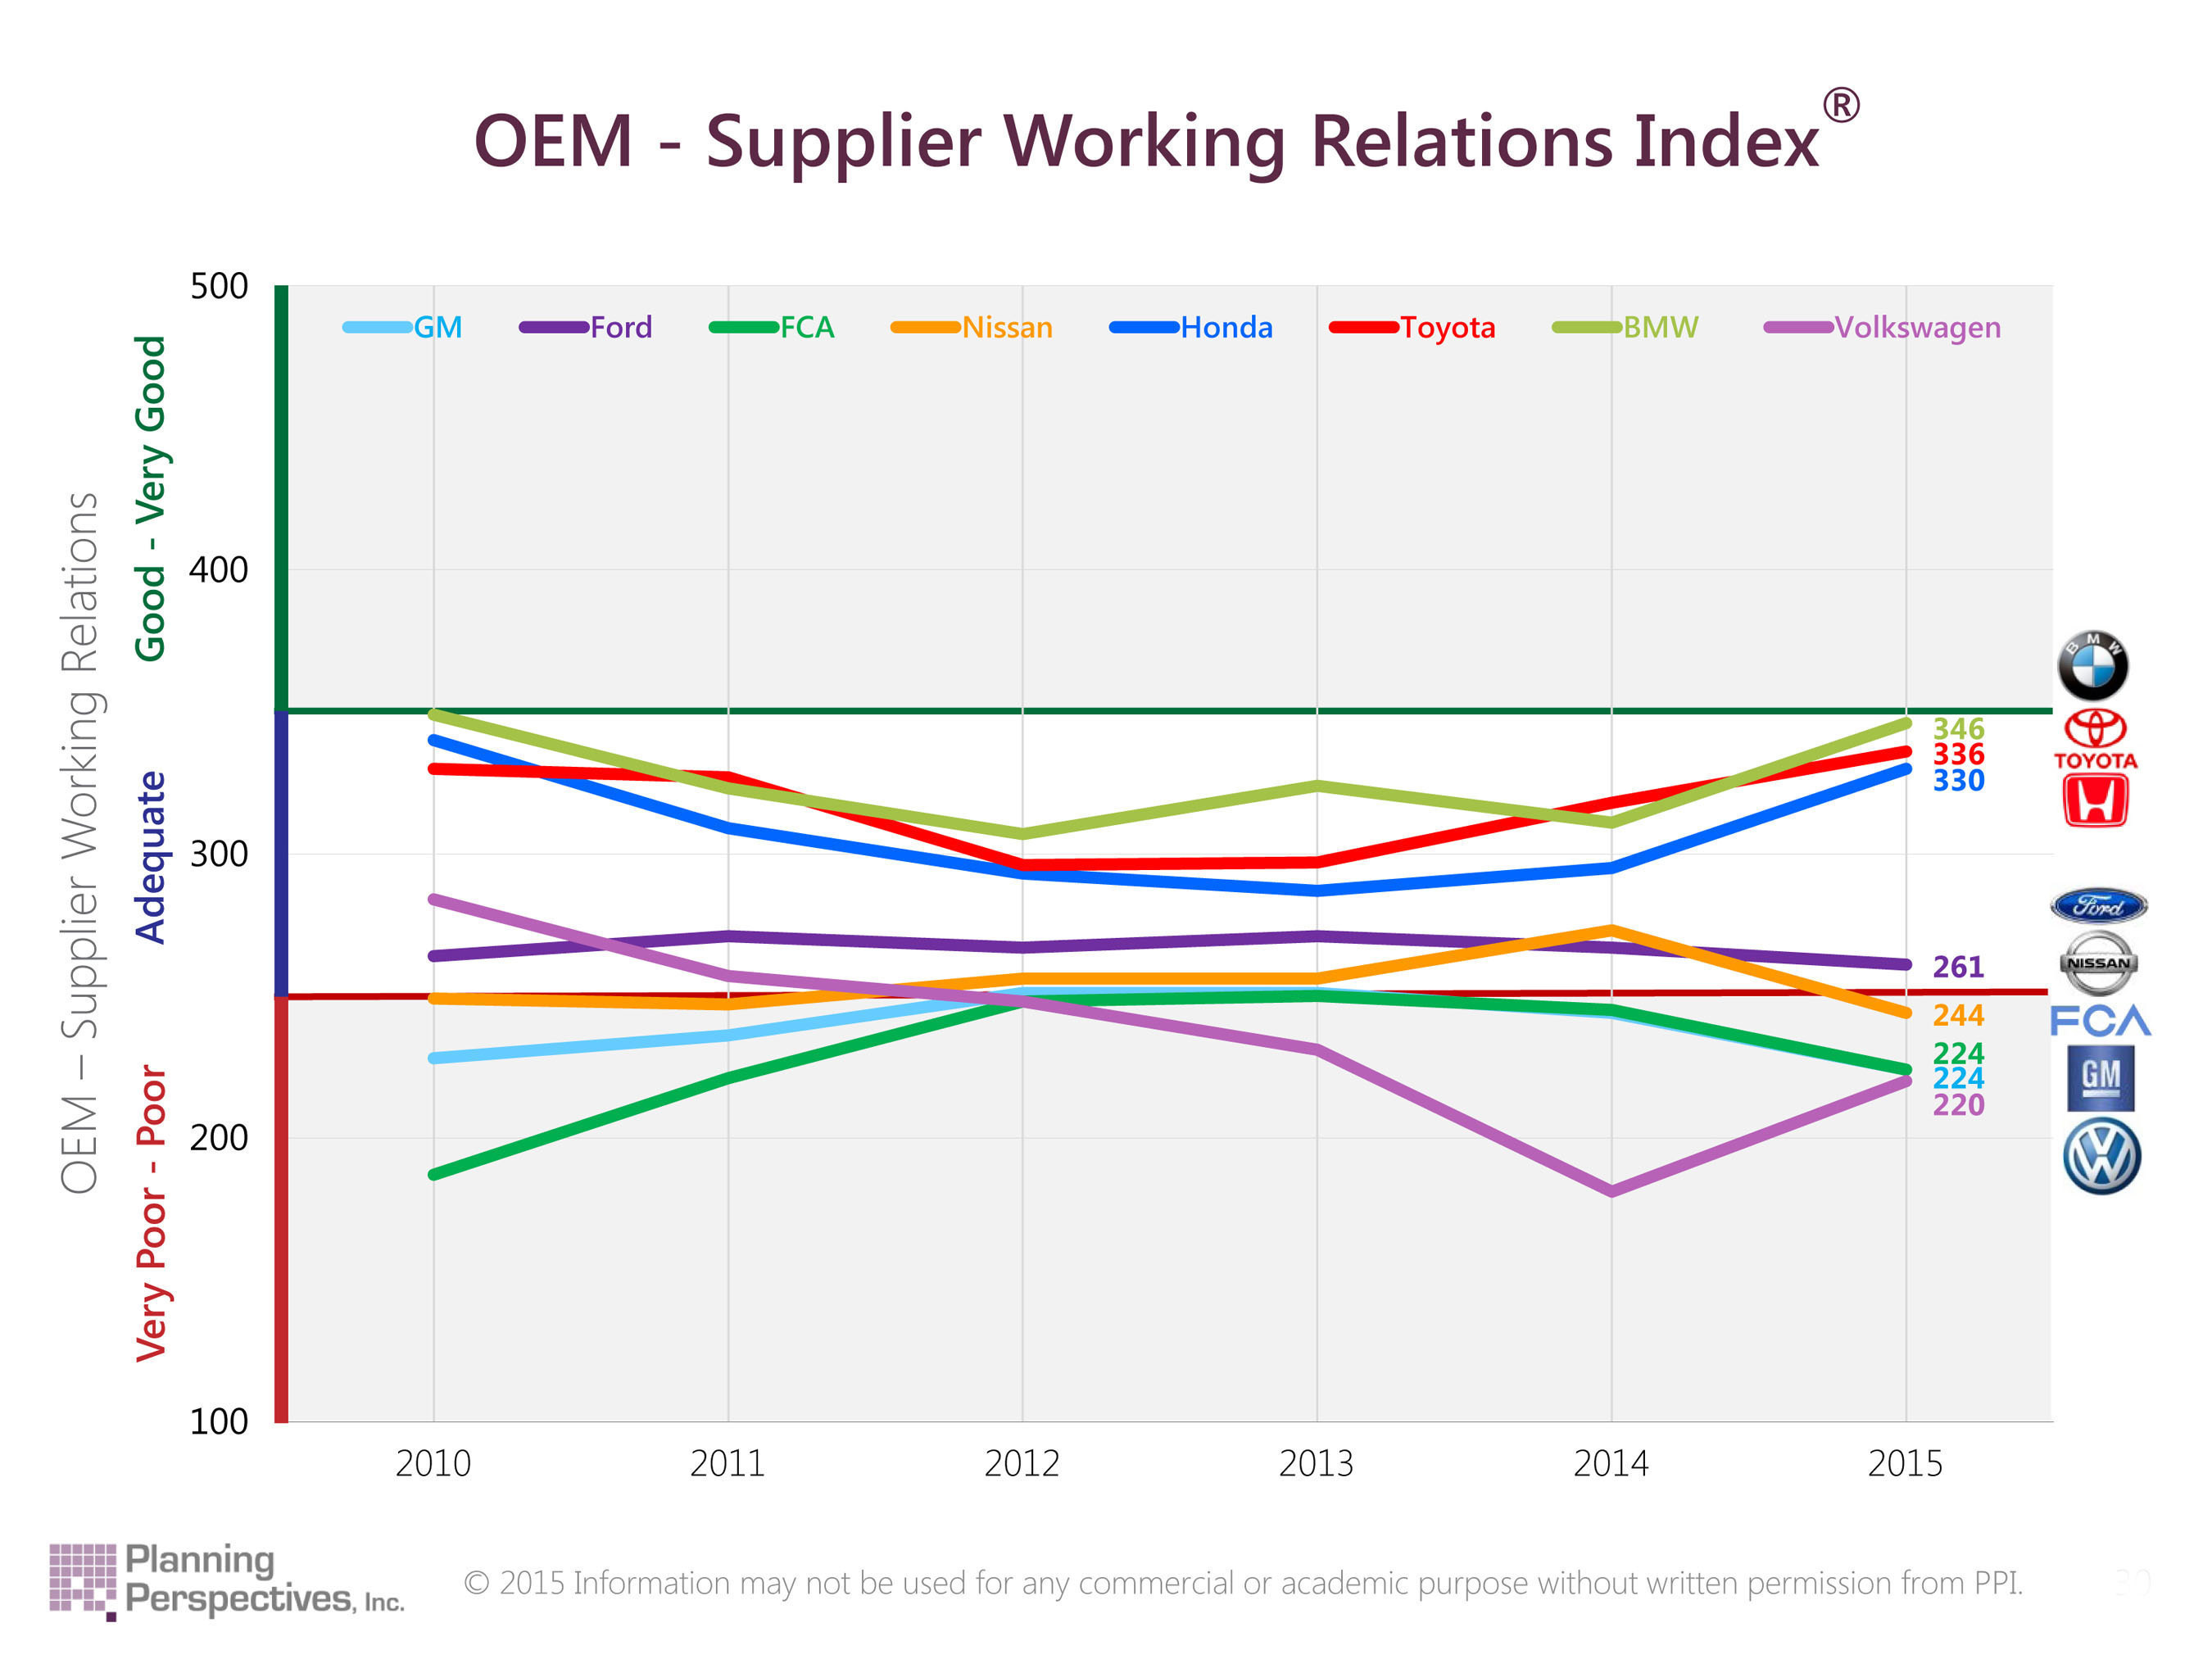 In addition to the Big 6 US and Japanese automakers, since 2010 the Working Relations Index(R) has included the German Big 3 - Volkswagen, BMW and Mercedes-Benz.  When they're added, BMW is ranked highest, VW the lowest - just below GM and FCA.  This year, not enough data was gathered to rank Mercedes-Benz so it is not graphed.  The German 3 US sales are not as significant as the Big Six's so they are not included with them.